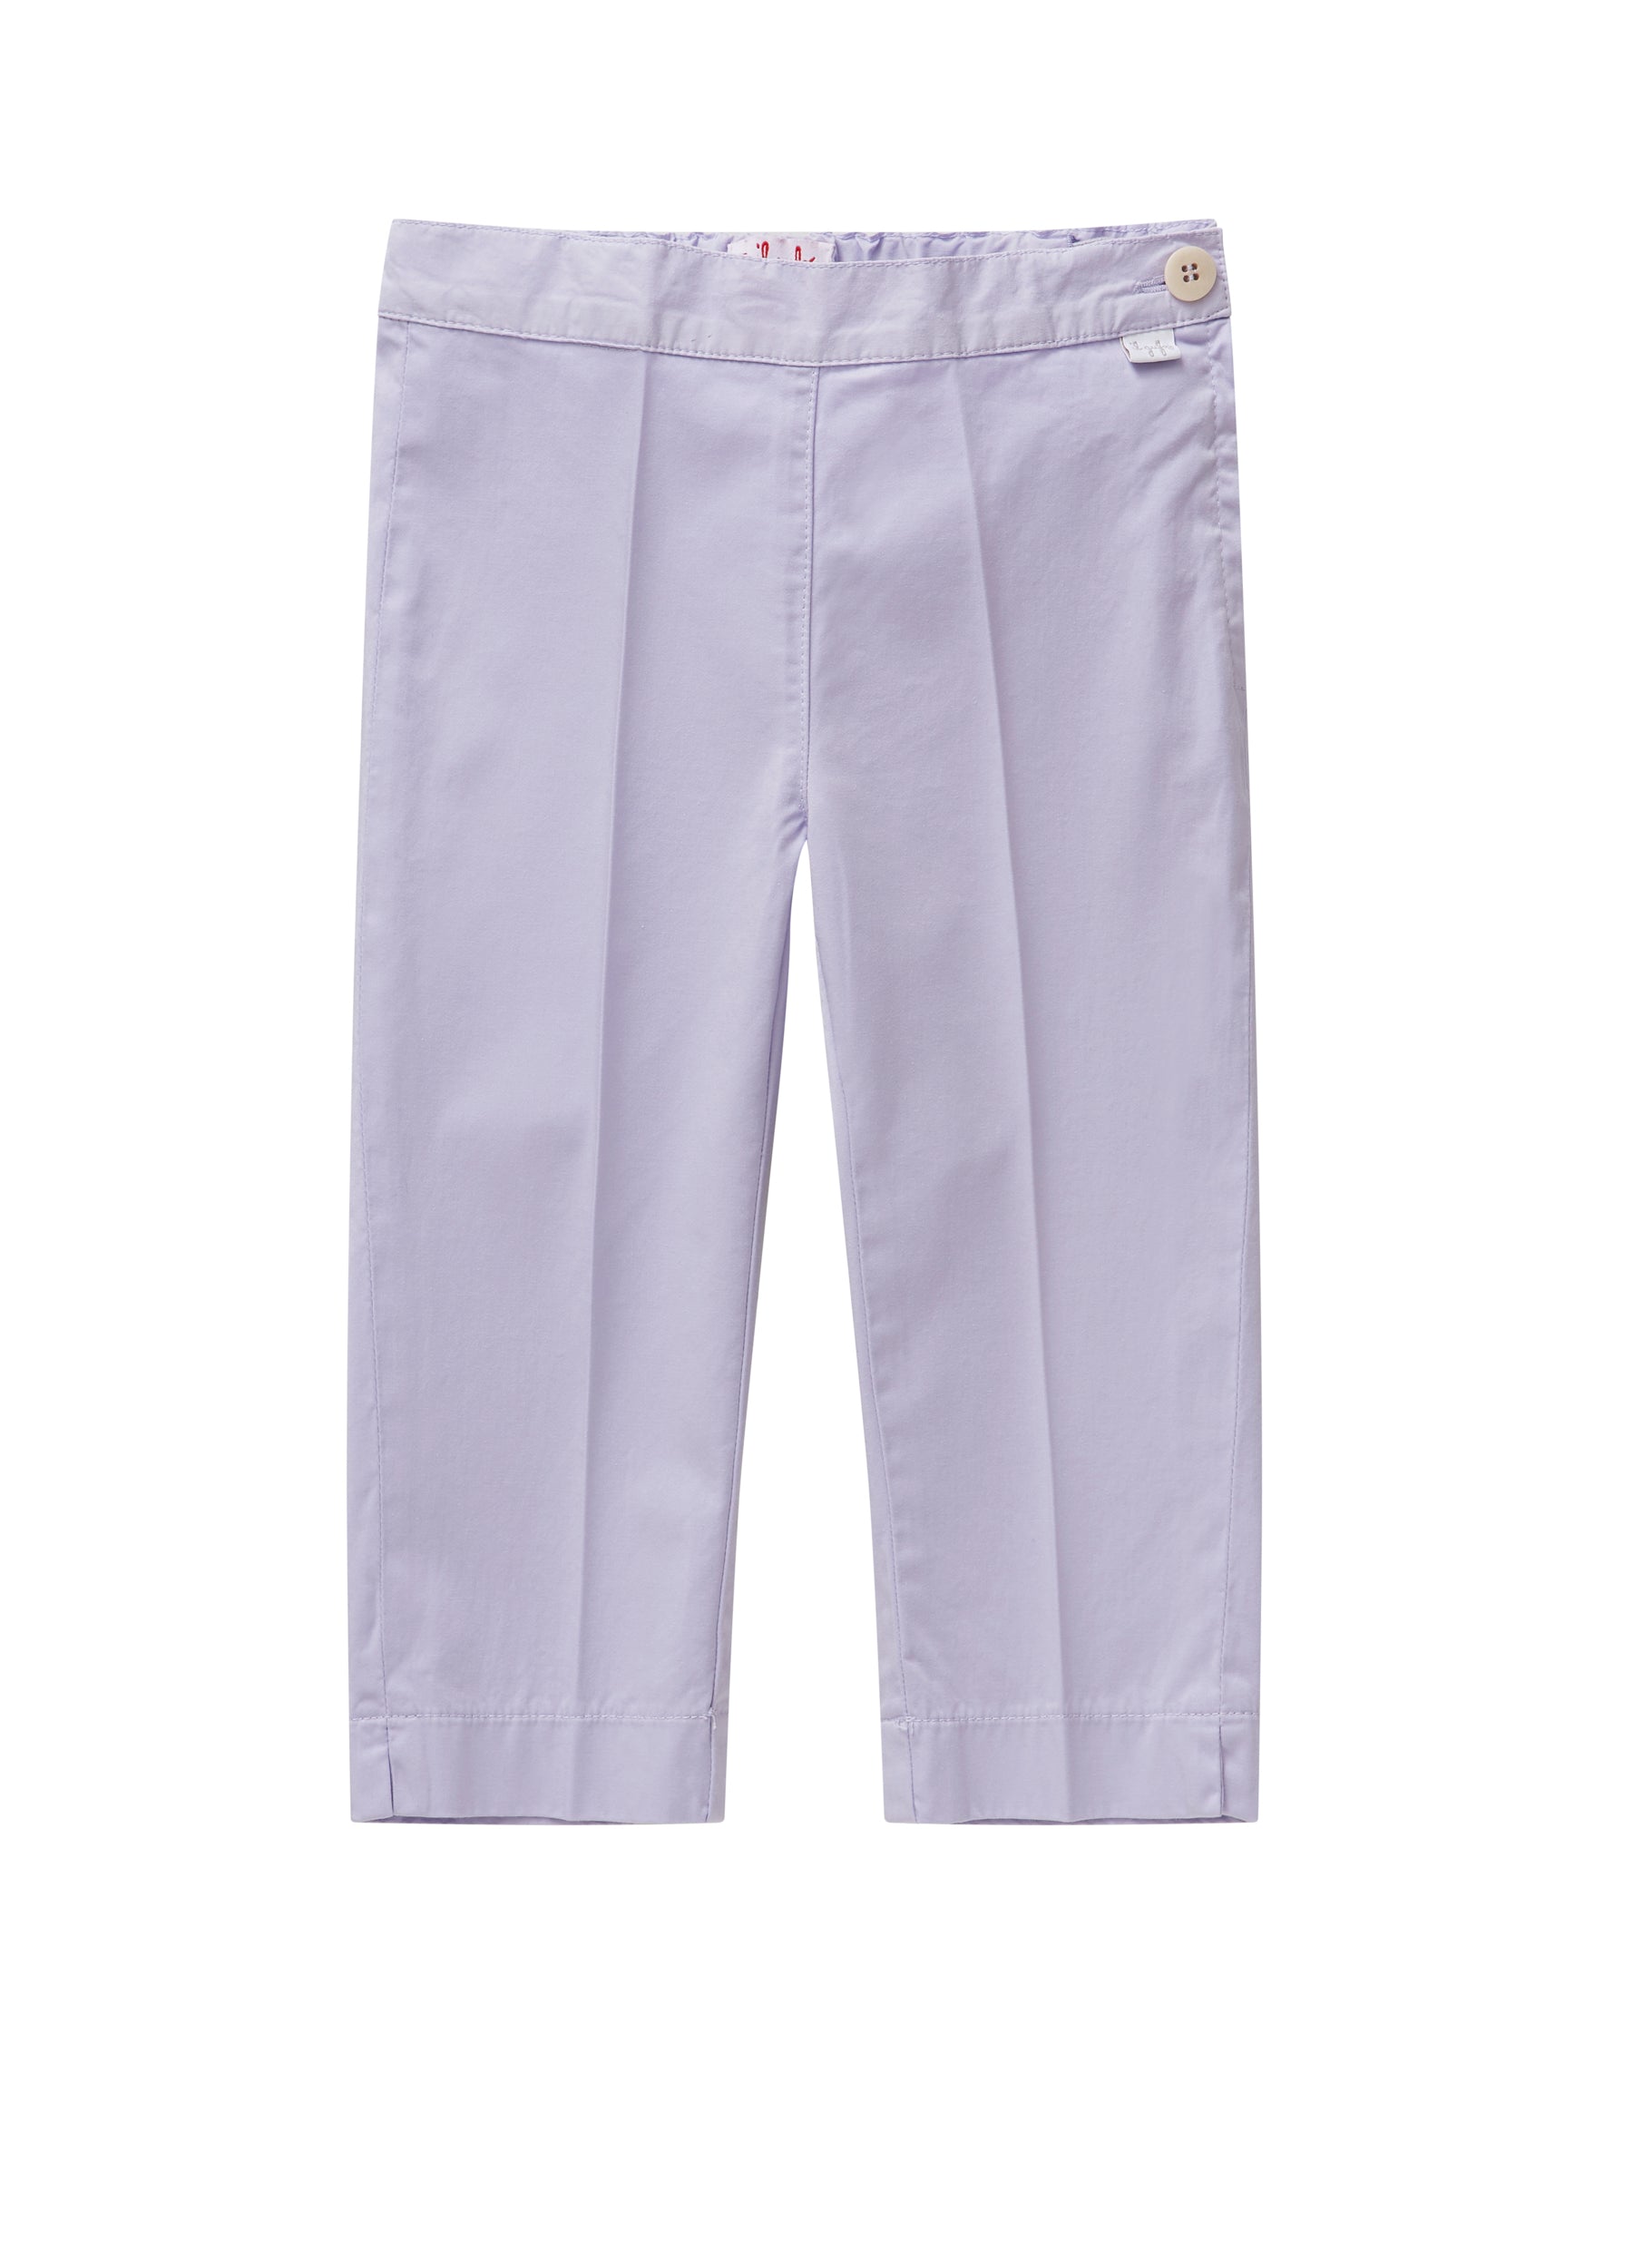 Girls Lilac Cotton Trousers